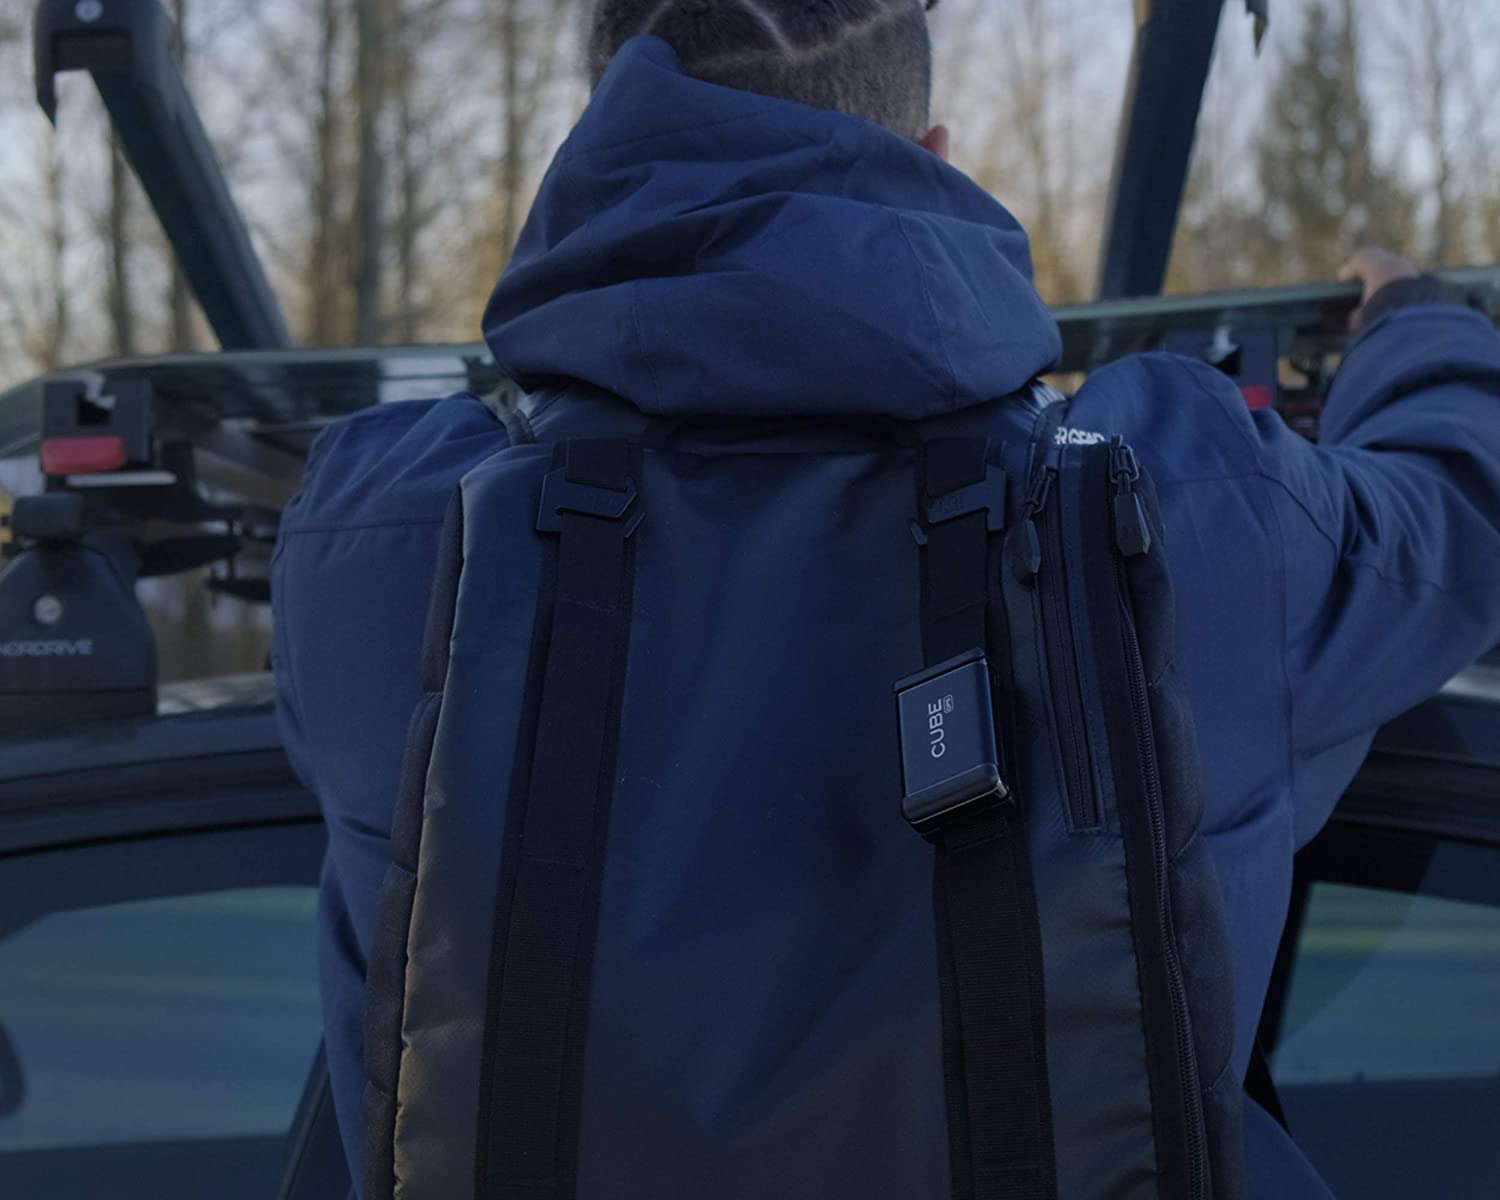 A Cube GPS unit attached to a man's backpack